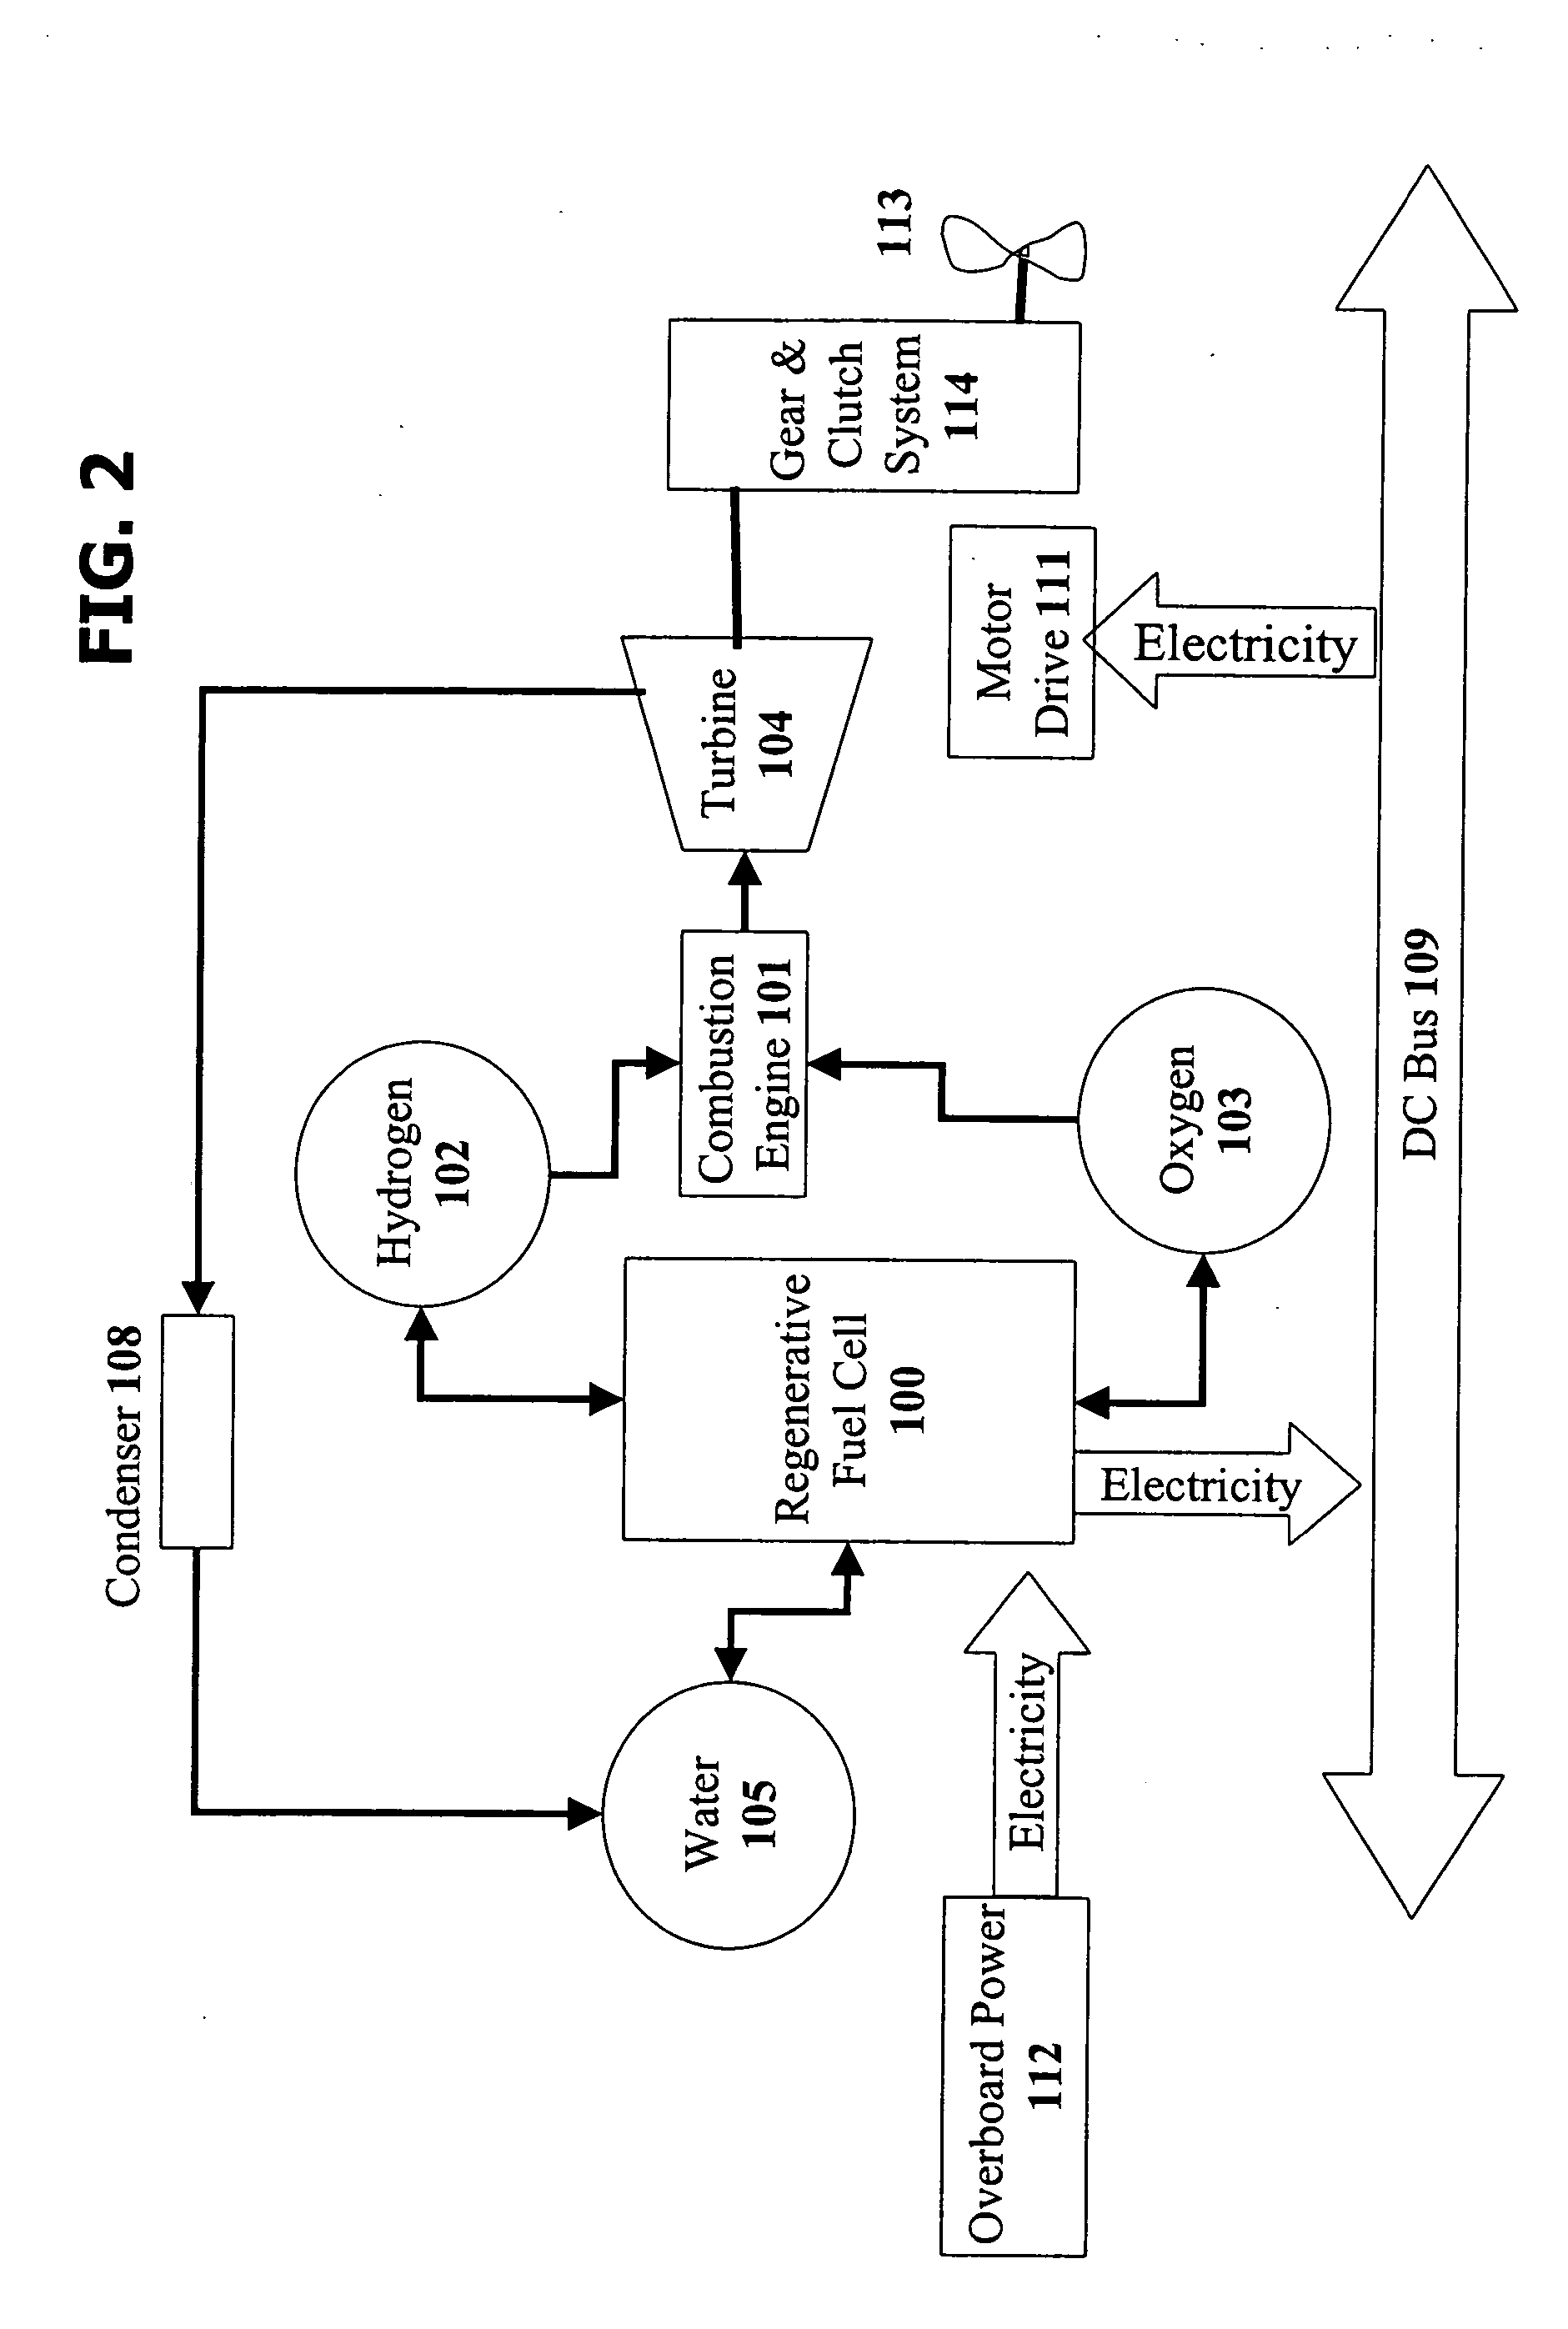 Power generation system using a combustion system and a fuel cell